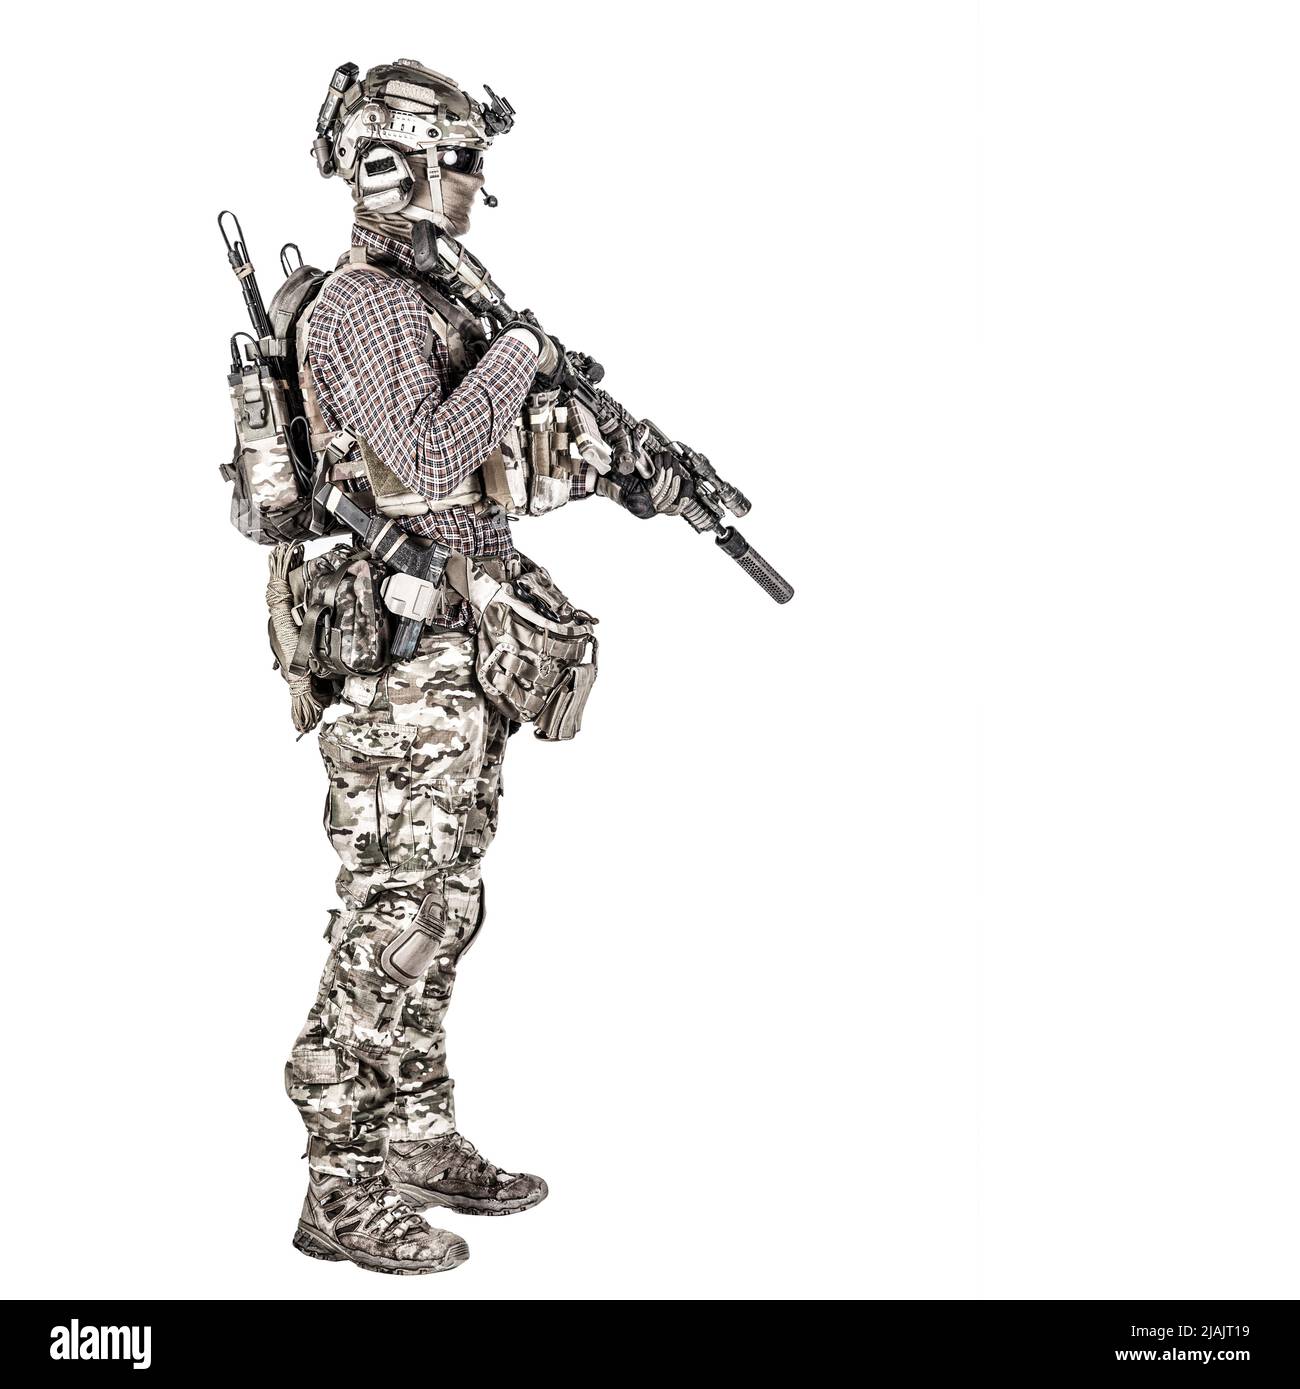 Full length portrait of airsoft player in camoflauge uniform and radio headset, with service rifle. Stock Photo